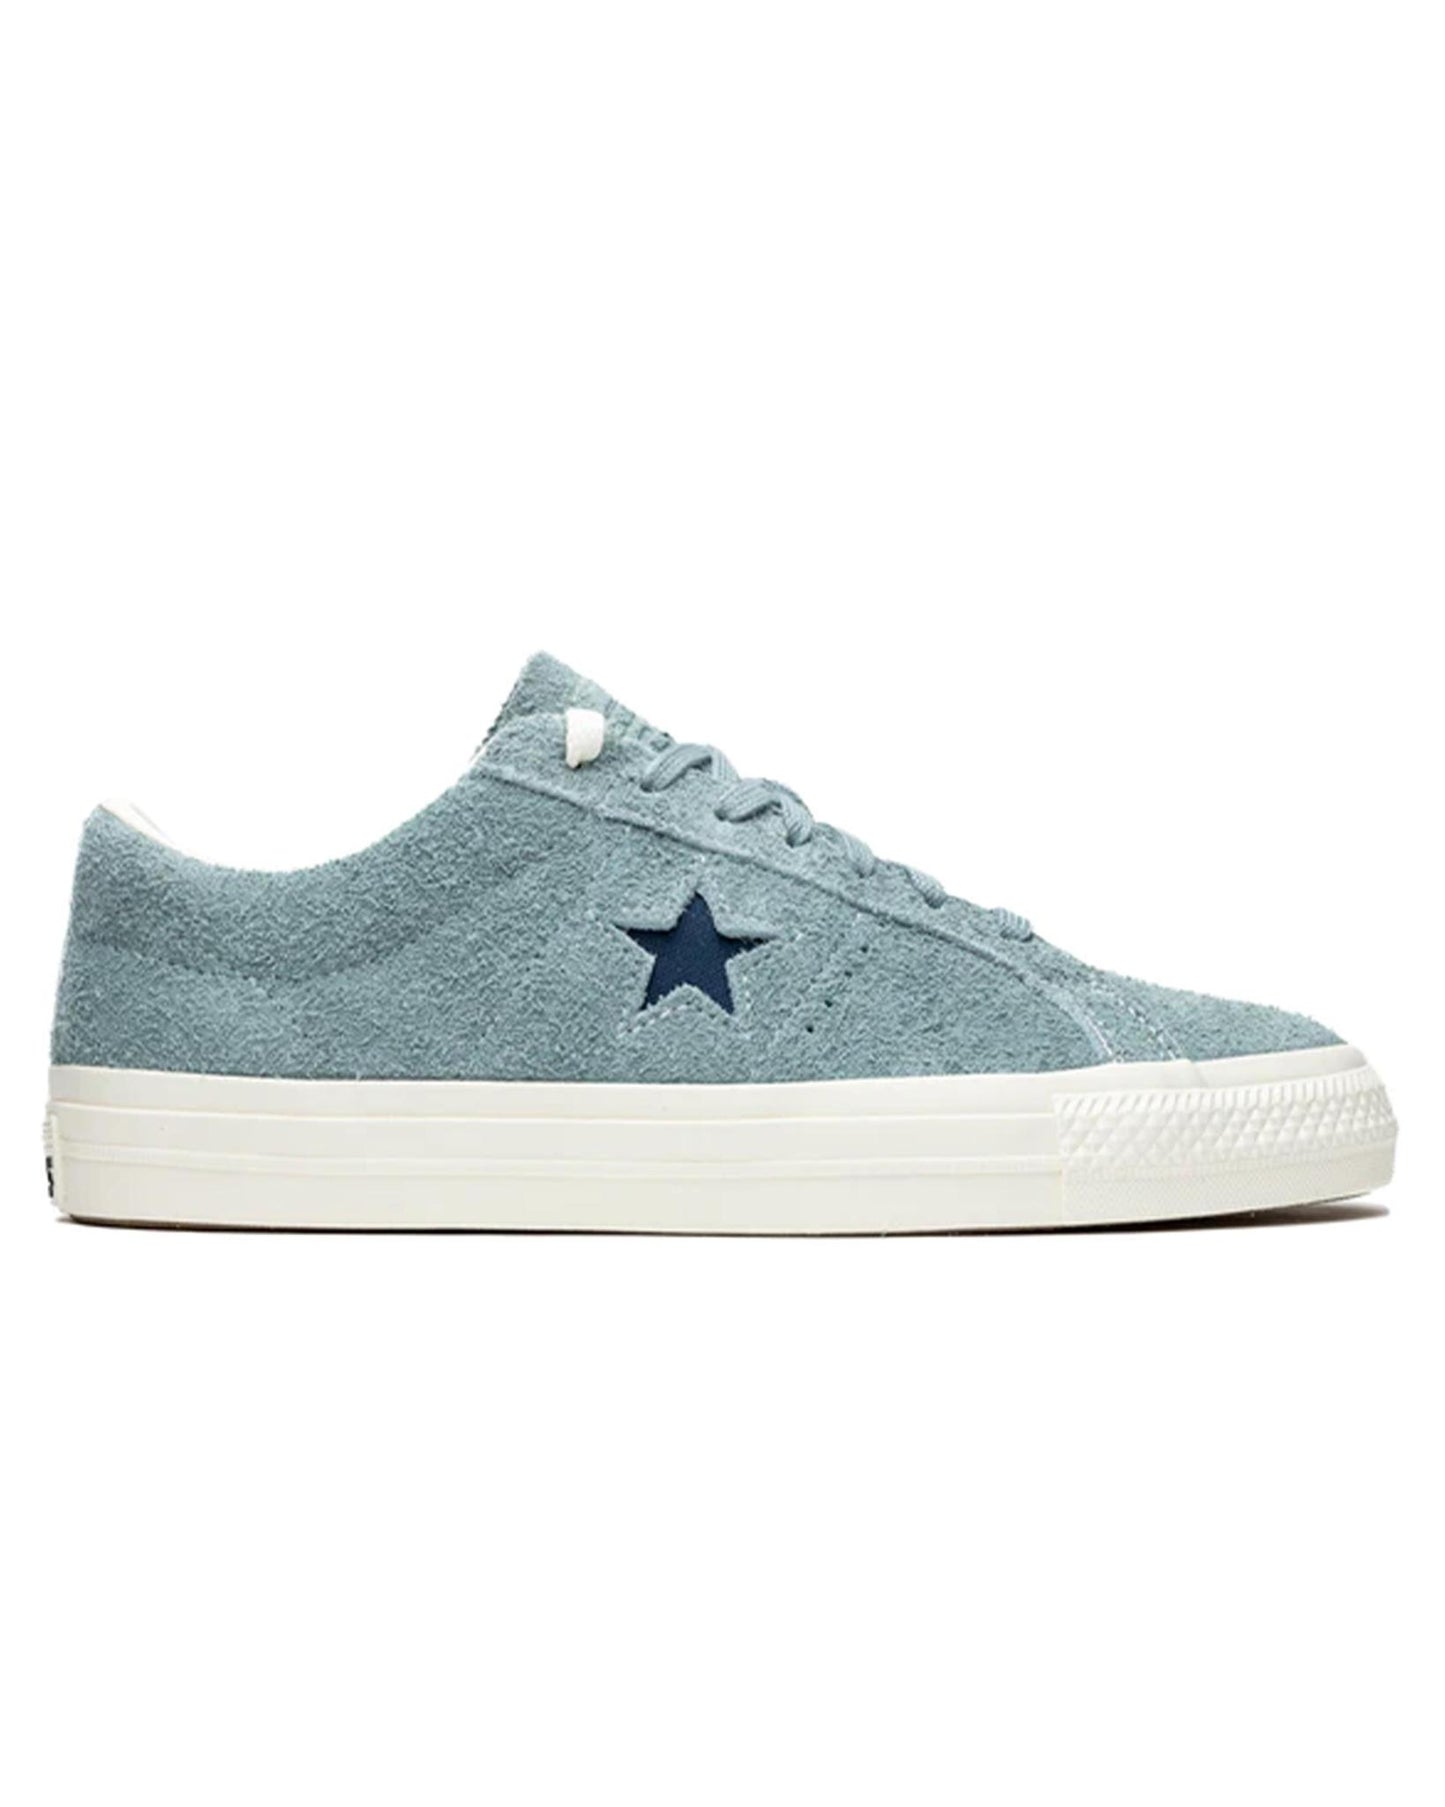 Converse One Star Pro Ox Tidepool | STASHED